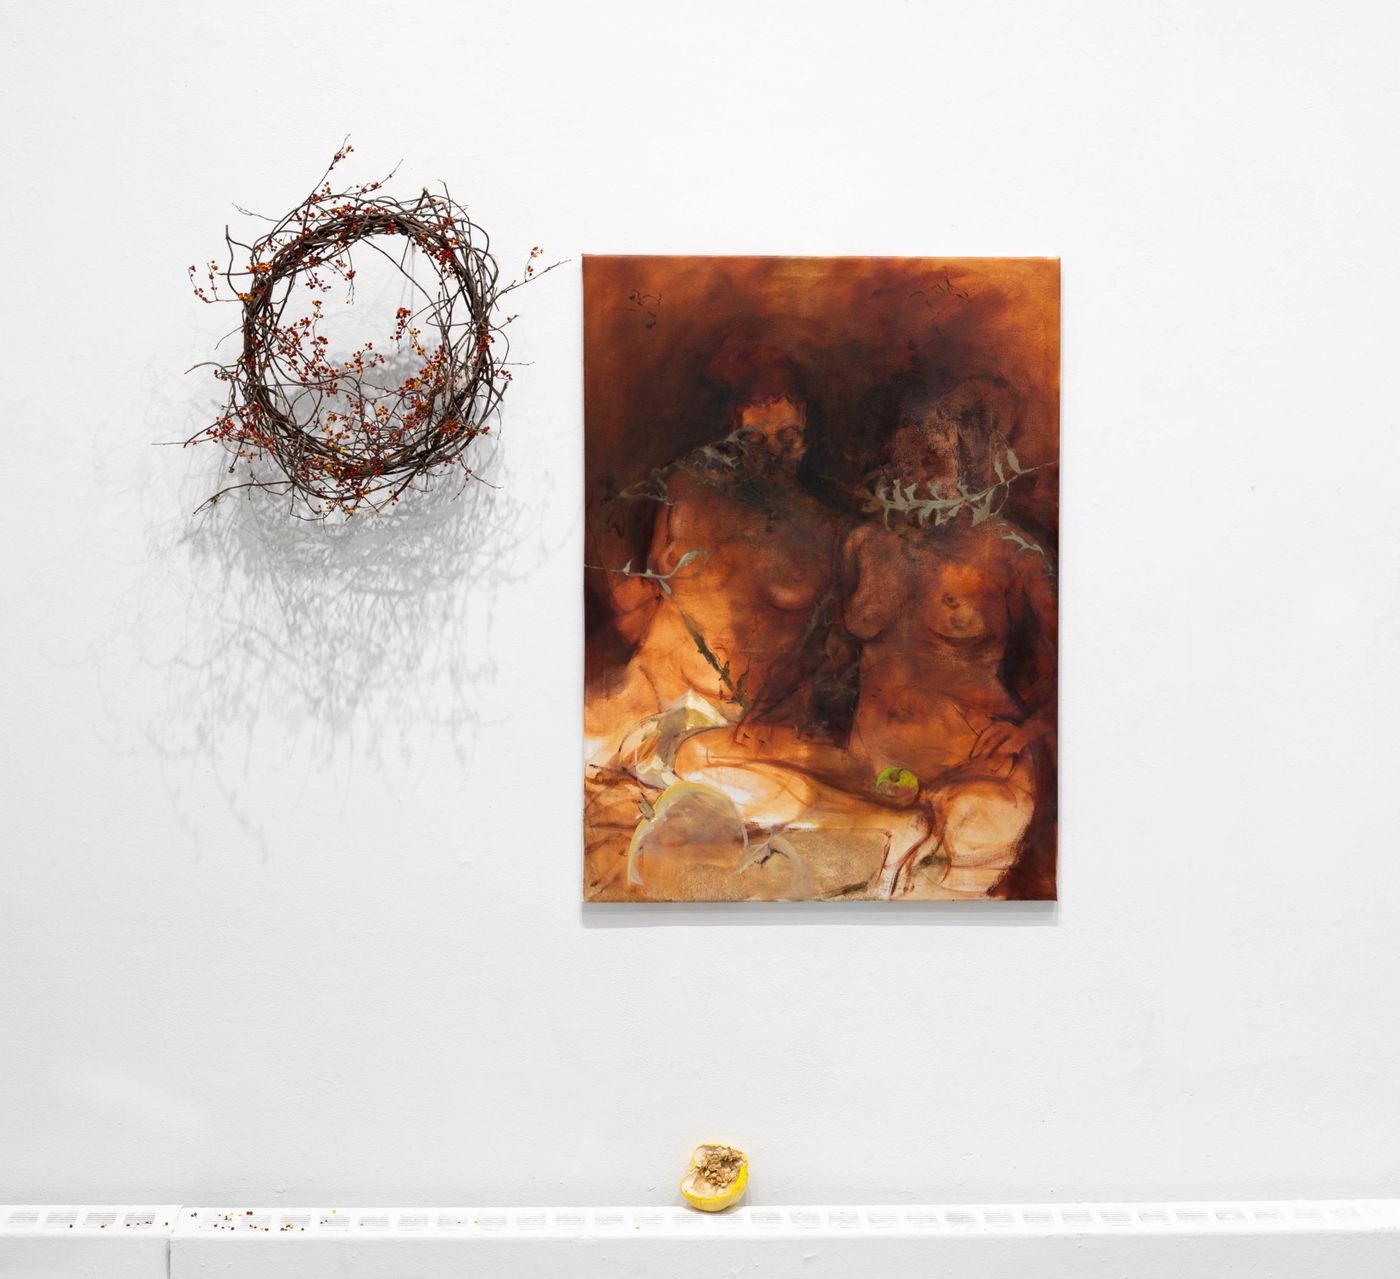 Bittersweet with Terrestrial Twins Portal and Pumpkin, 2022. Bittersweet wreath, oil on canvas, new moon pumpkin; 21 x 21 in., 37 x 50 in., and 5 x 5 in. Photo: Allison Minto.